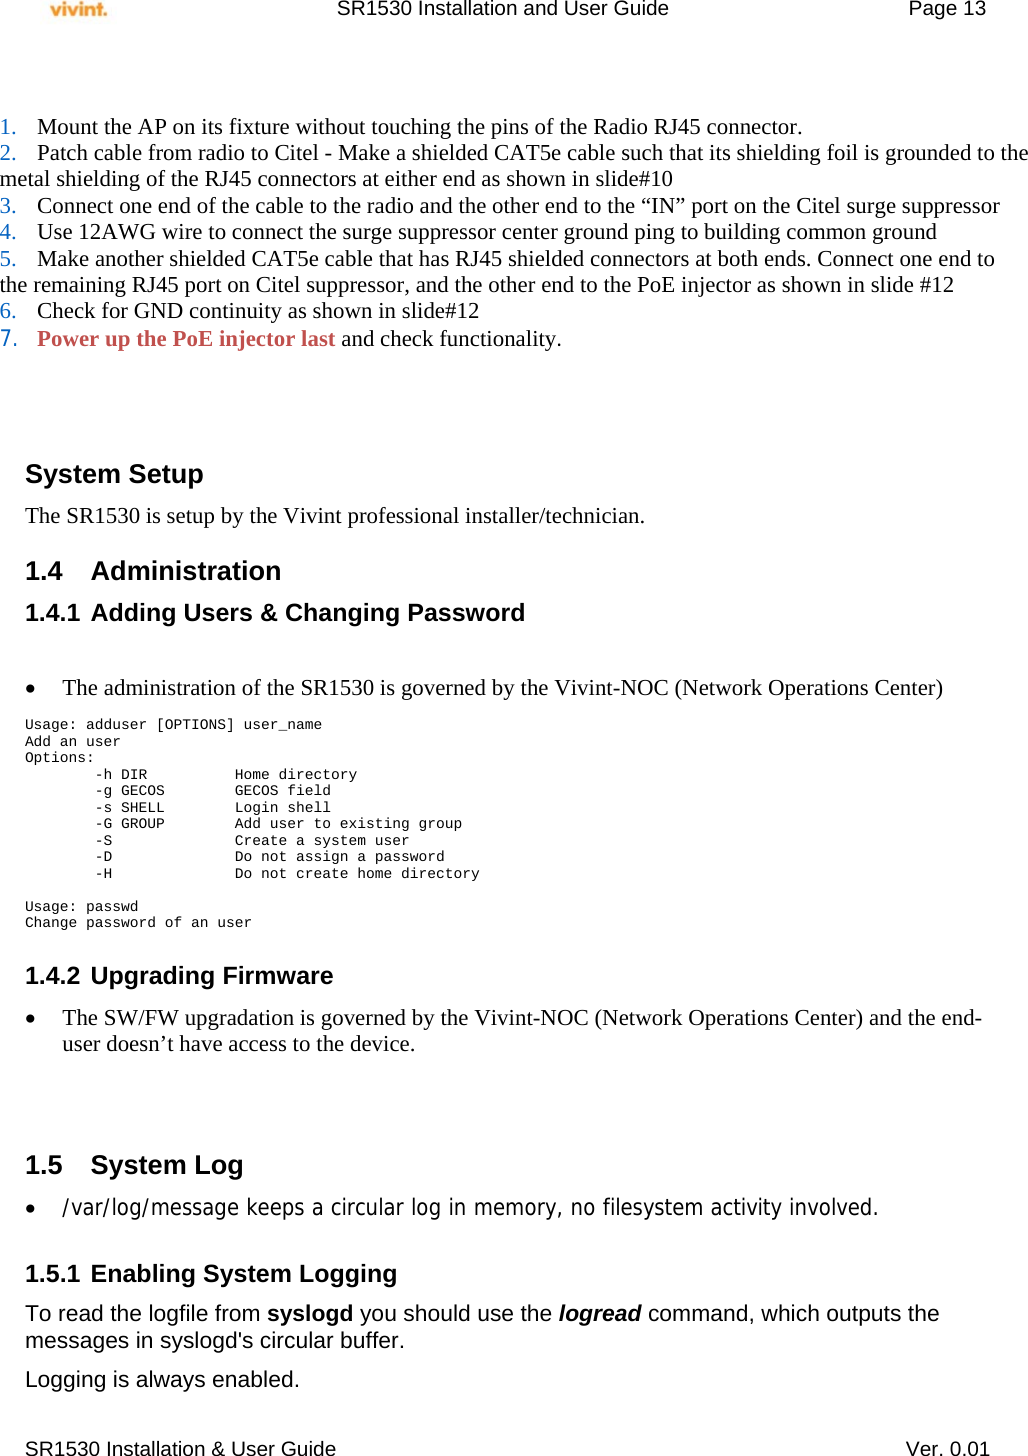     SR1530 Installation and User Guide   Page 13     SR1530 Installation &amp; User Guide   Ver. 0.01           System Setup The SR1530 is setup by the Vivint professional installer/technician.   1.4 Administration 1.4.1 Adding Users &amp; Changing Password    The administration of the SR1530 is governed by the Vivint-NOC (Network Operations Center)  Usage: adduser [OPTIONS] user_name Add an user Options:         -h DIR          Home directory         -g GECOS        GECOS field         -s SHELL        Login shell         -G GROUP        Add user to existing group         -S              Create a system user         -D              Do not assign a password         -H              Do not create home directory  Usage: passwd Change password of an user  1.4.2 Upgrading Firmware  The SW/FW upgradation is governed by the Vivint-NOC (Network Operations Center) and the end-user doesn’t have access to the device.    1.5 System Log  /var/log/message keeps a circular log in memory, no filesystem activity involved.  1.5.1 Enabling System Logging To read the logfile from syslogd you should use the logread command, which outputs the messages in syslogd&apos;s circular buffer. Logging is always enabled.  1. Mount the AP on its fixture without touching the pins of the Radio RJ45 connector. 2. Patch cable from radio to Citel - Make a shielded CAT5e cable such that its shielding foil is grounded to the  metal shielding of the RJ45 connectors at either end as shown in slide#10 3. Connect one end of the cable to the radio and the other end to the “IN” port on the Citel surge suppressor 4. Use 12AWG wire to connect the surge suppressor center ground ping to building common ground 5. Make another shielded CAT5e cable that has RJ45 shielded connectors at both ends. Connect one end to  the remaining RJ45 port on Citel suppressor, and the other end to the PoE injector as shown in slide #12 6. Check for GND continuity as shown in slide#12  7. Power up the PoE injector last and check functionality. 